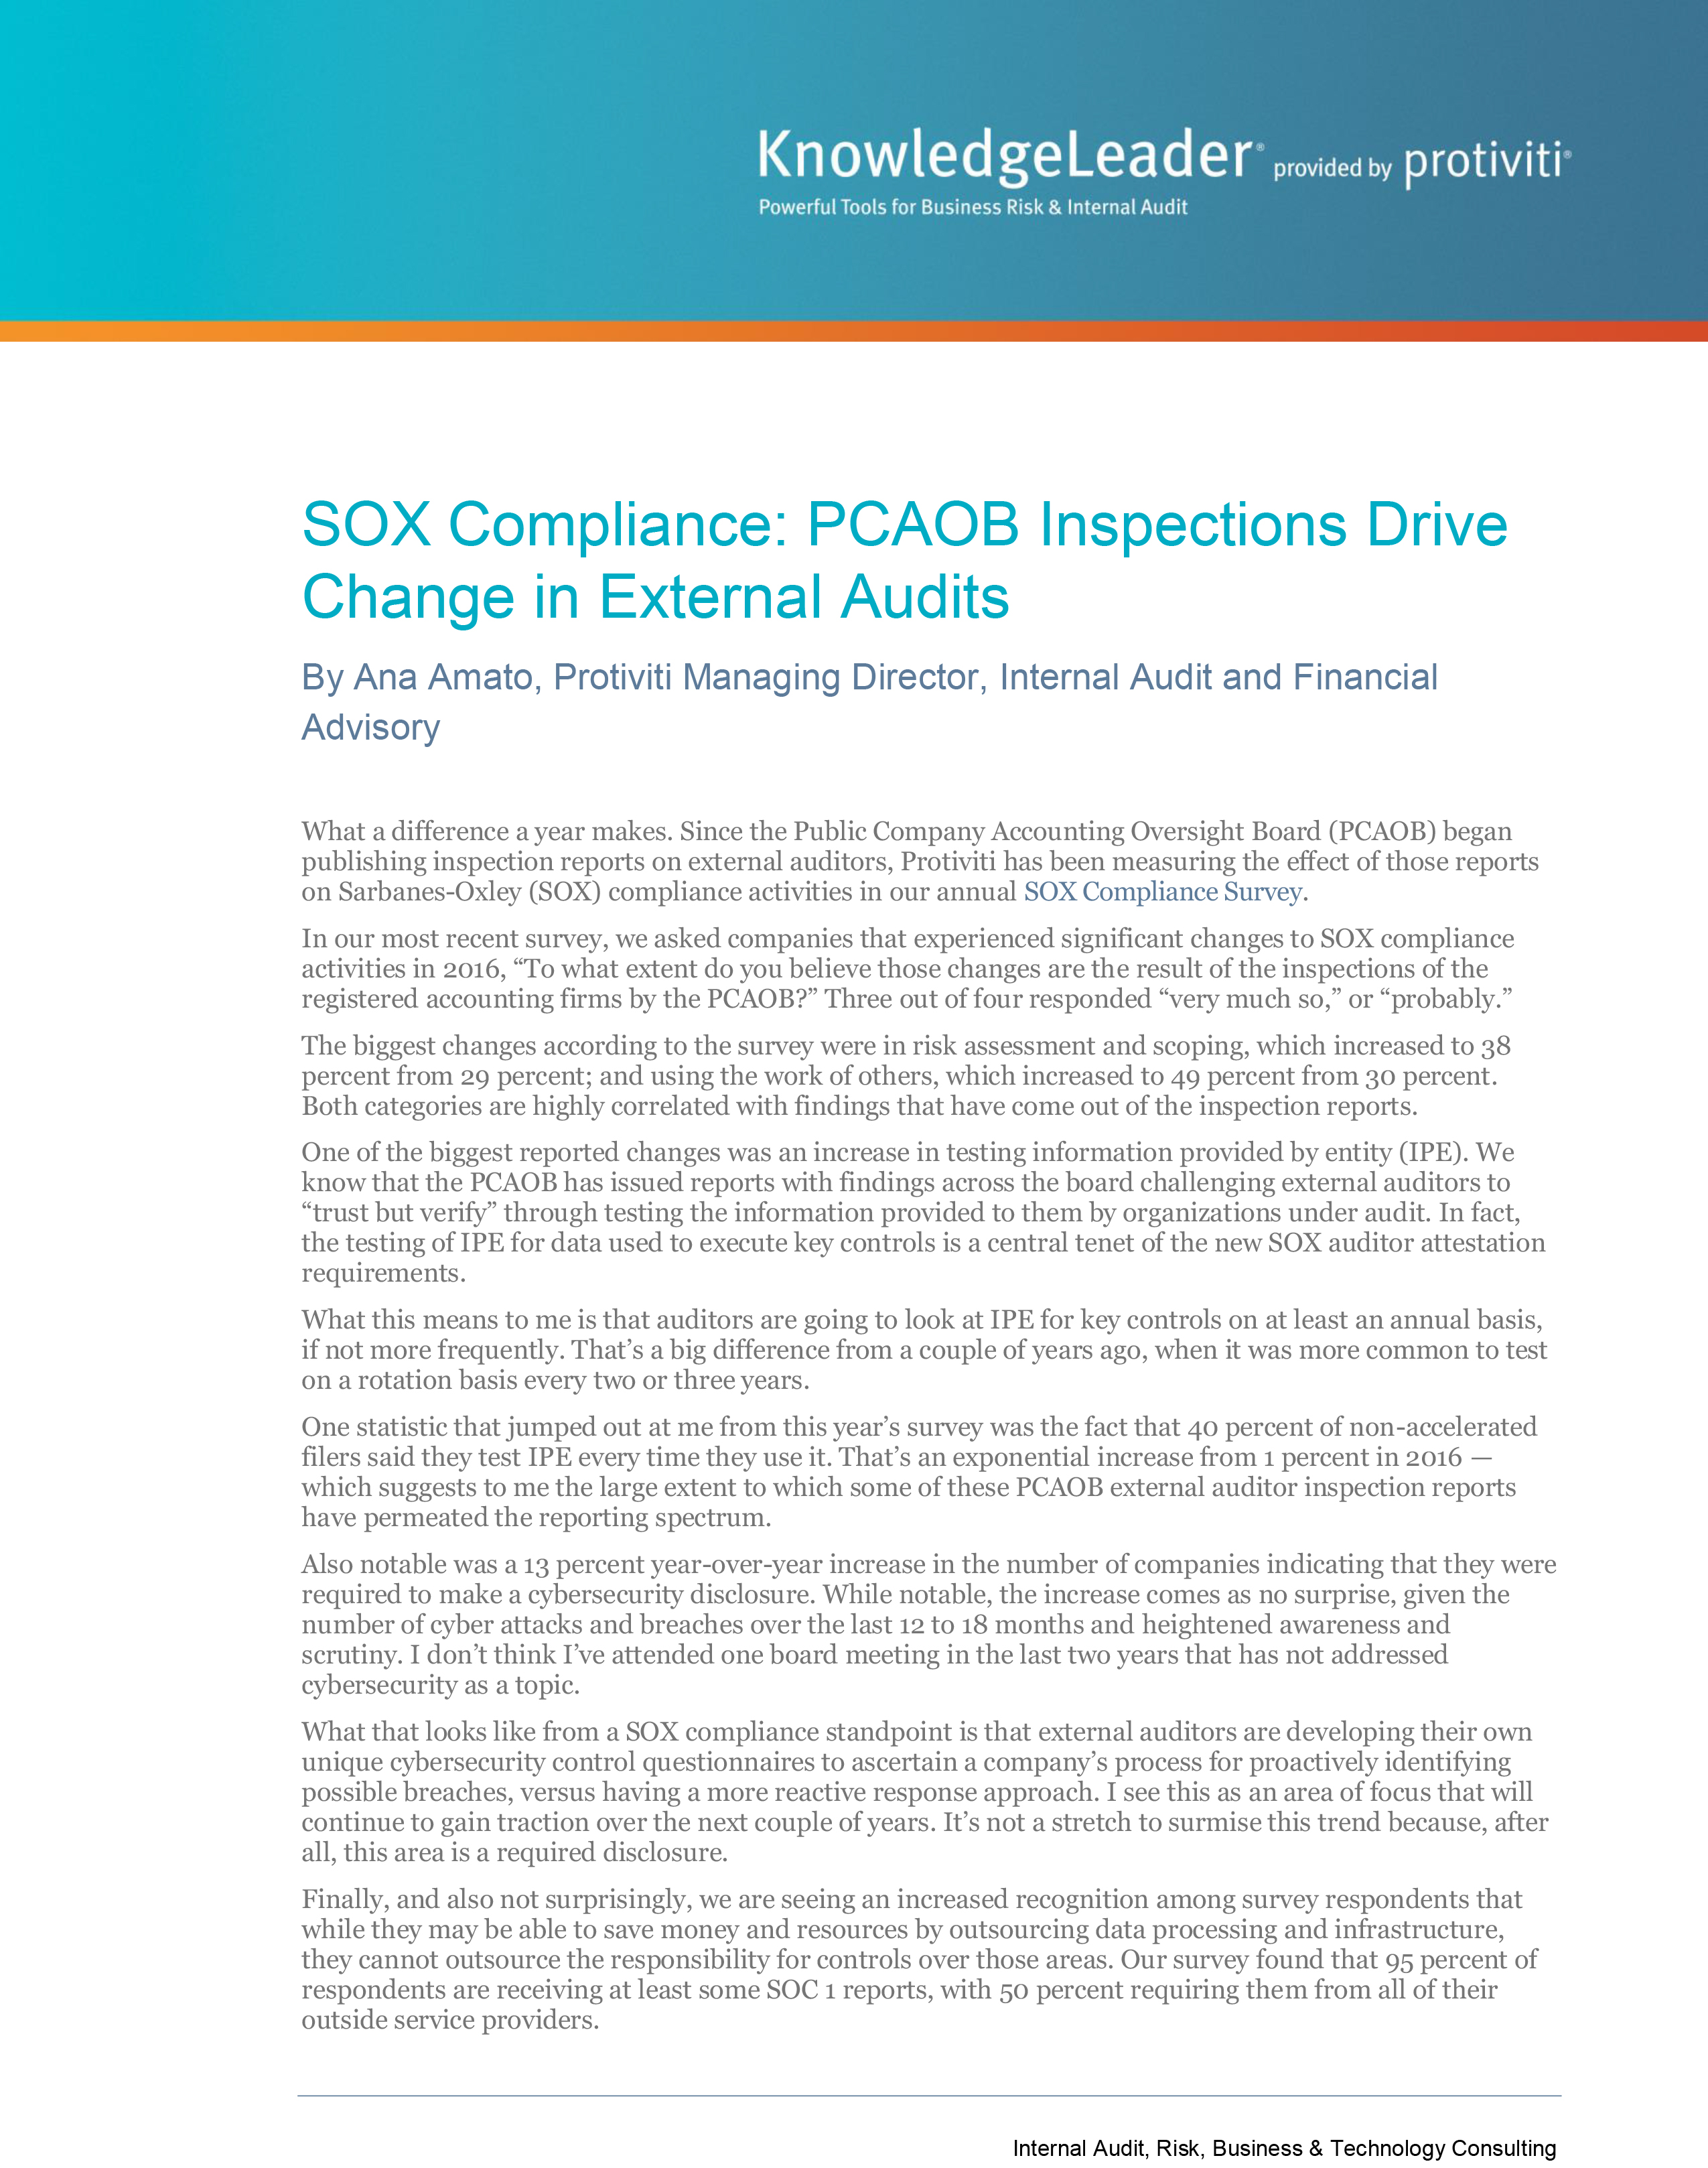 Screenshot of the first page of SOX Compliance - PCAOB Inspections Drive Change in External Audits